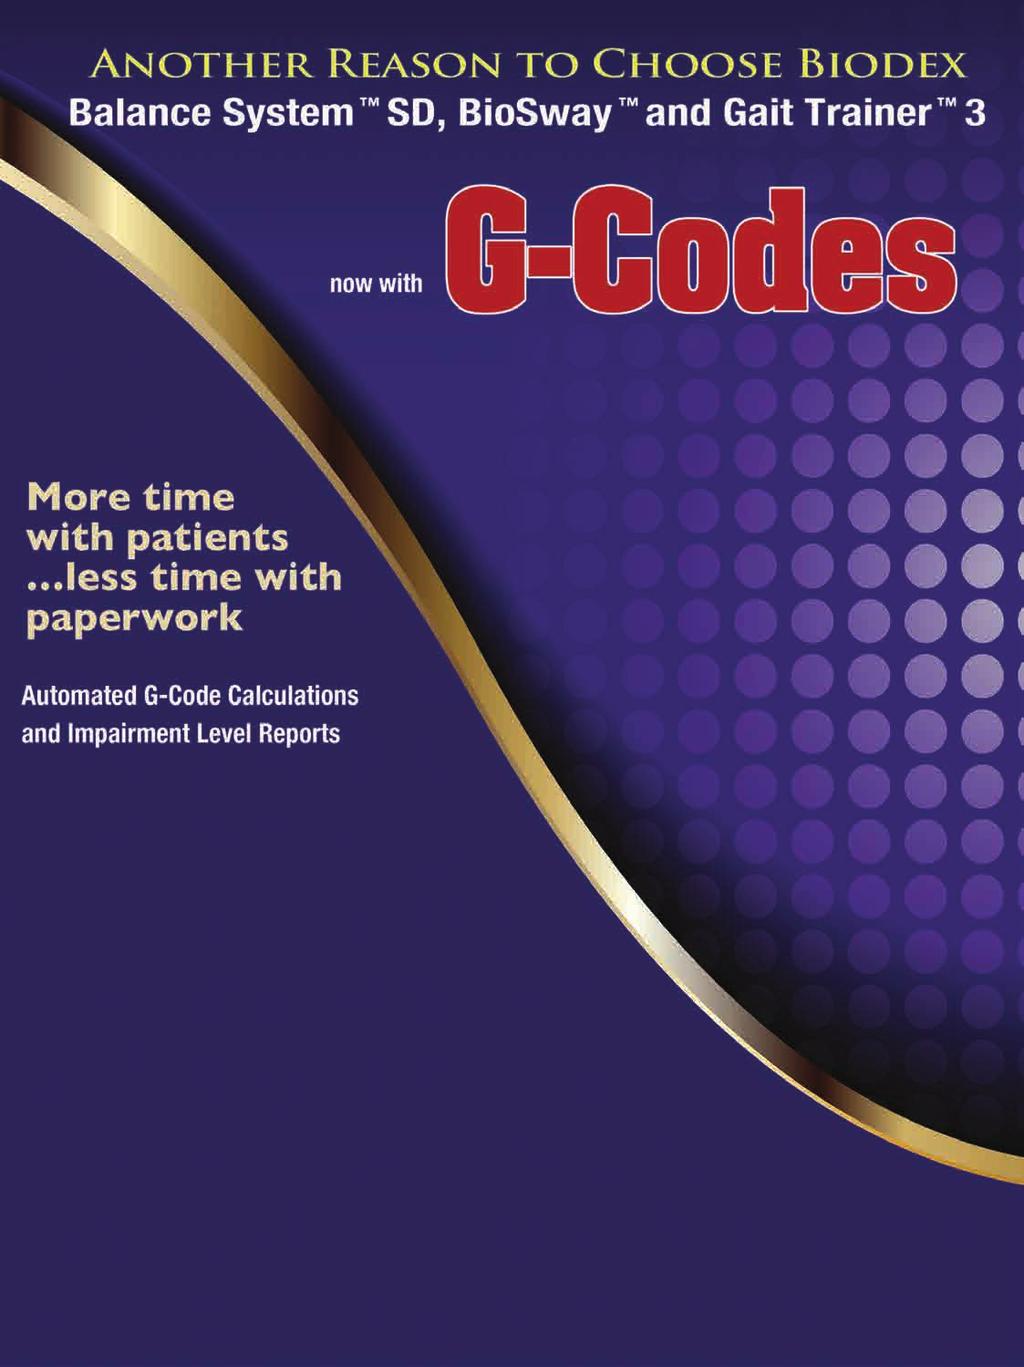 Increase efficiency and productivity through use of automated G-code